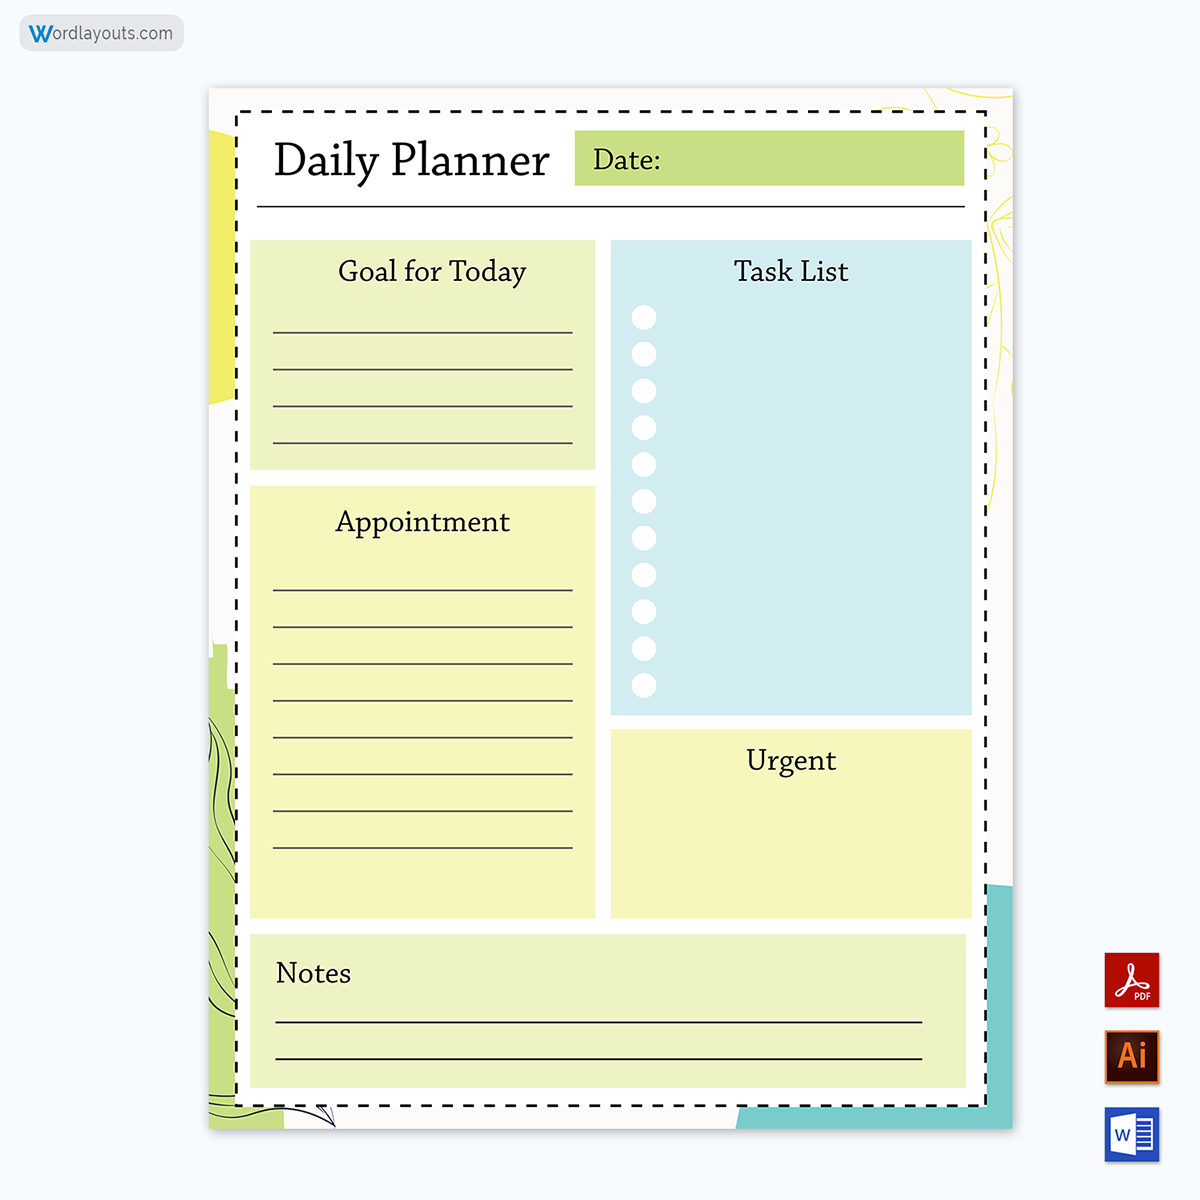 Daily Planner Template-8669ndnjp-06-23-p03